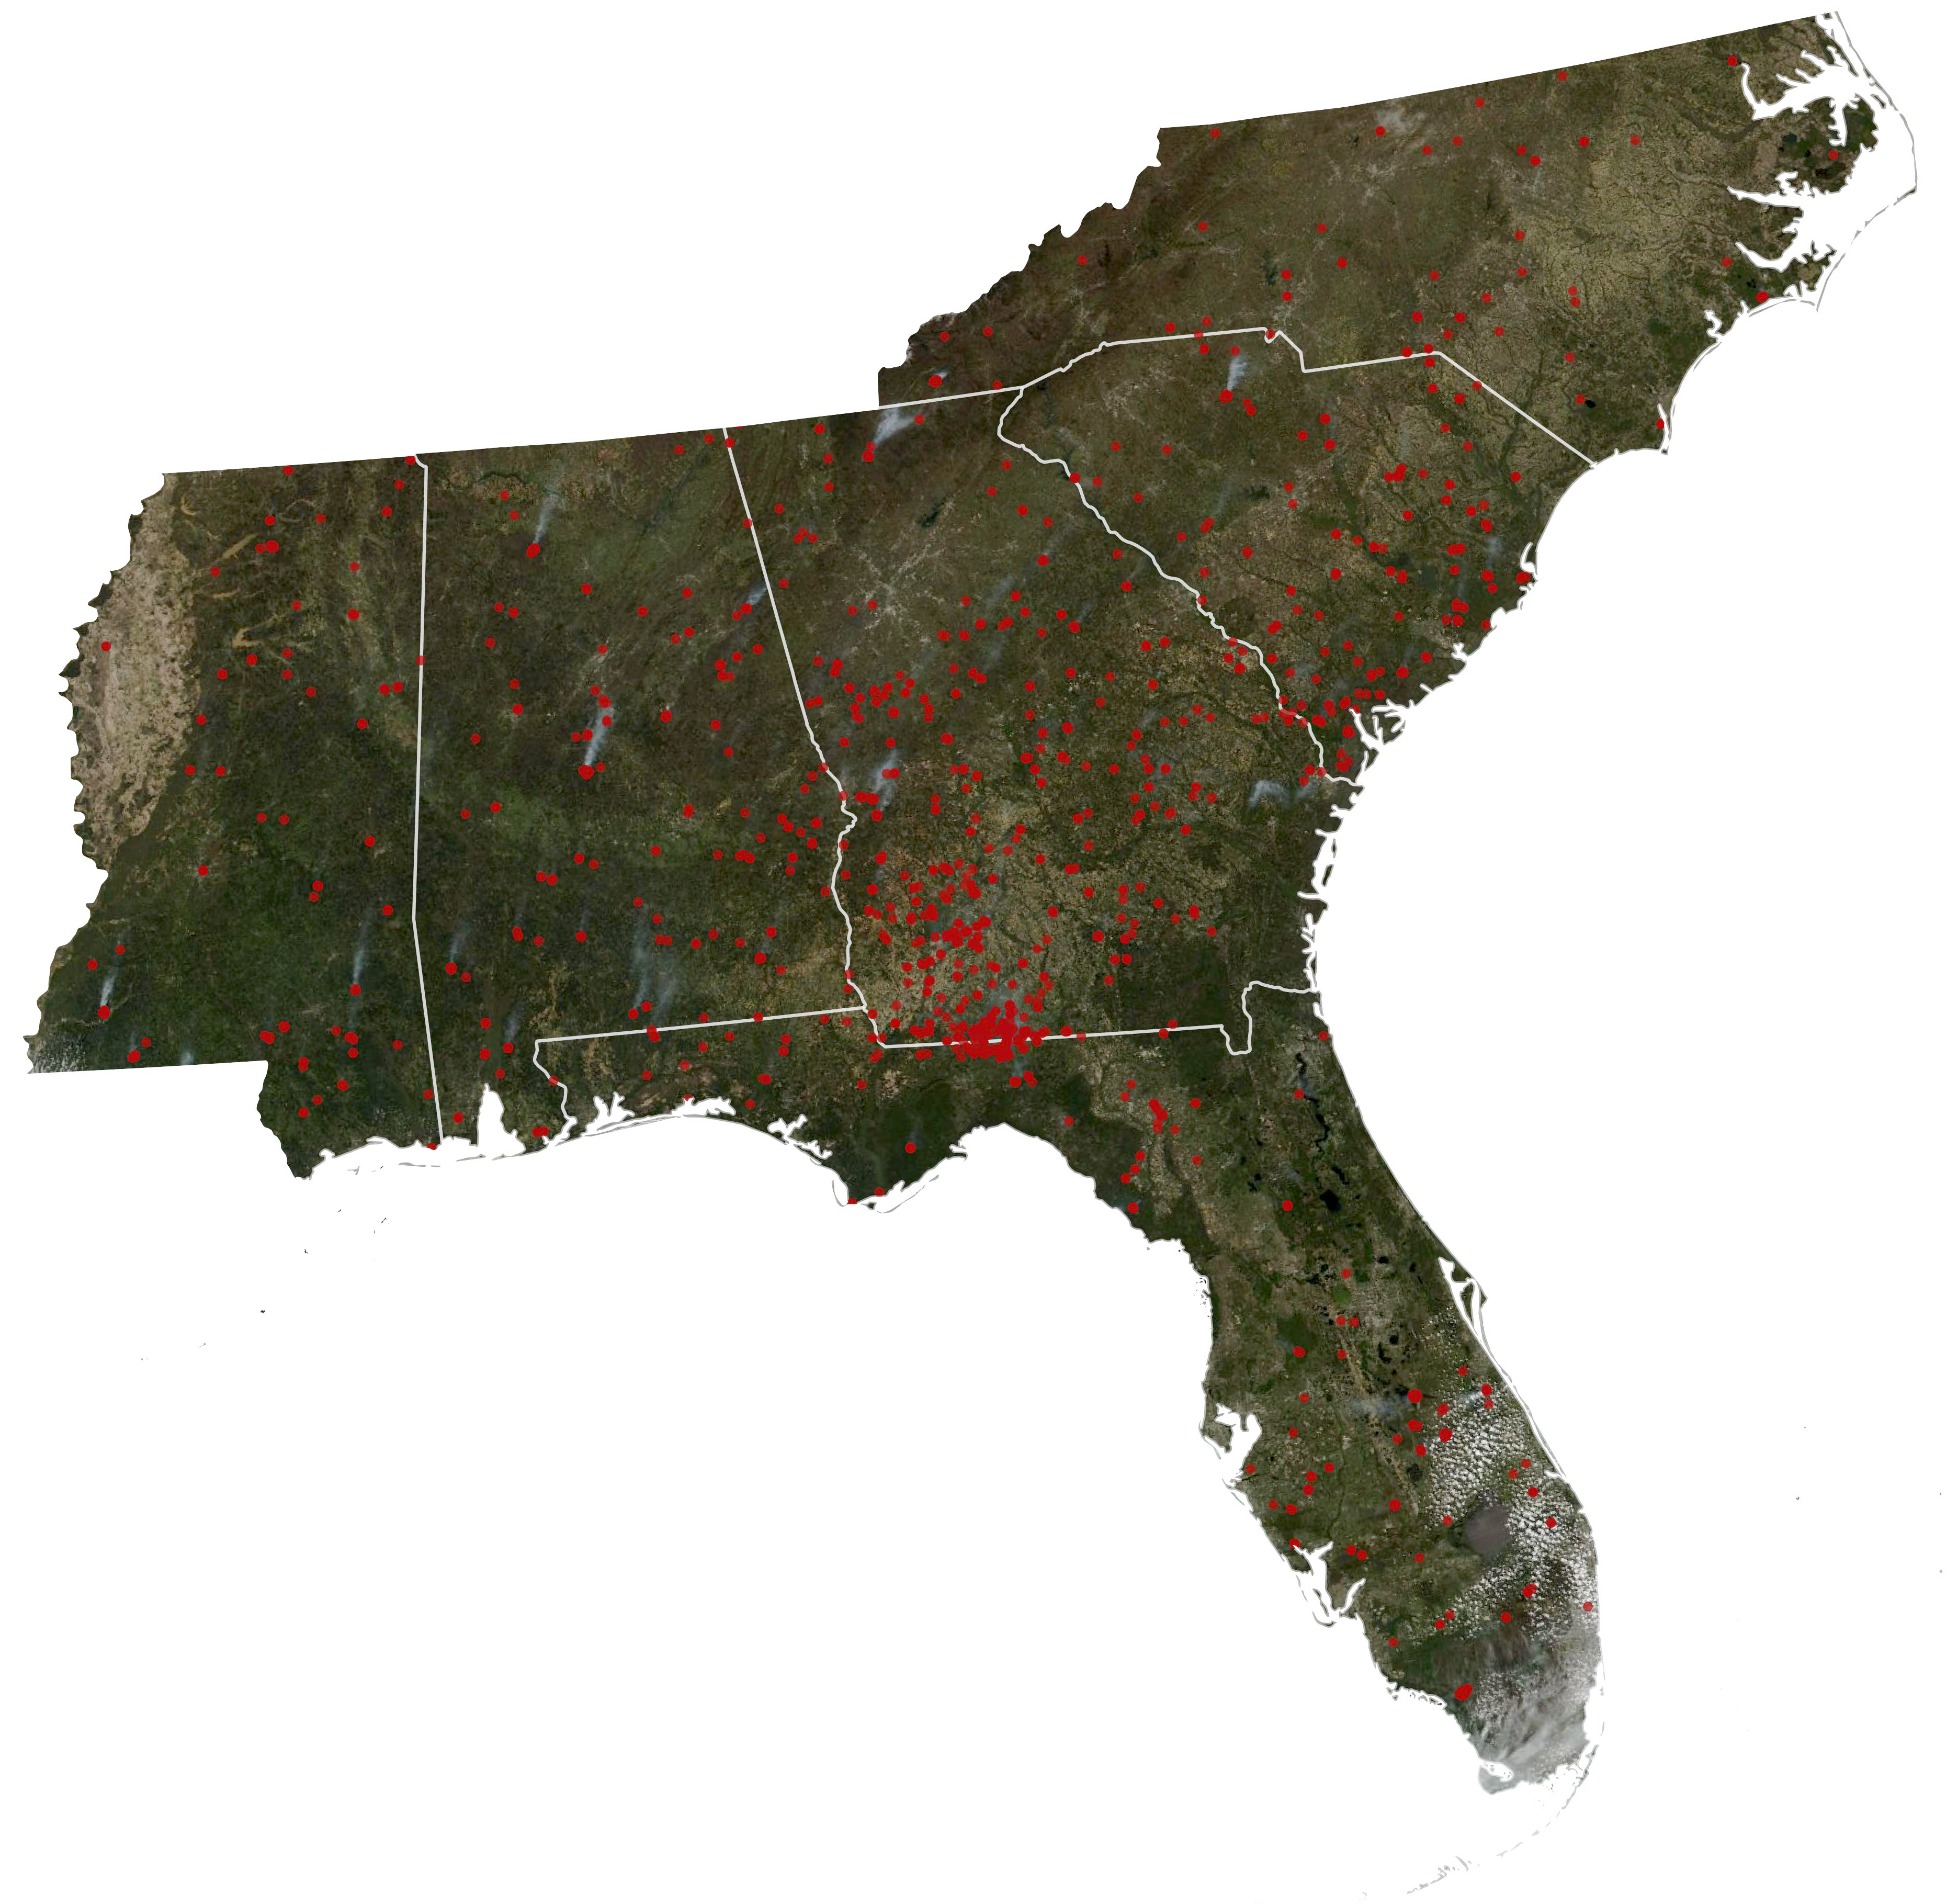 Satellites Show a Decline in Fire in the U.S. Southeast - related image preview